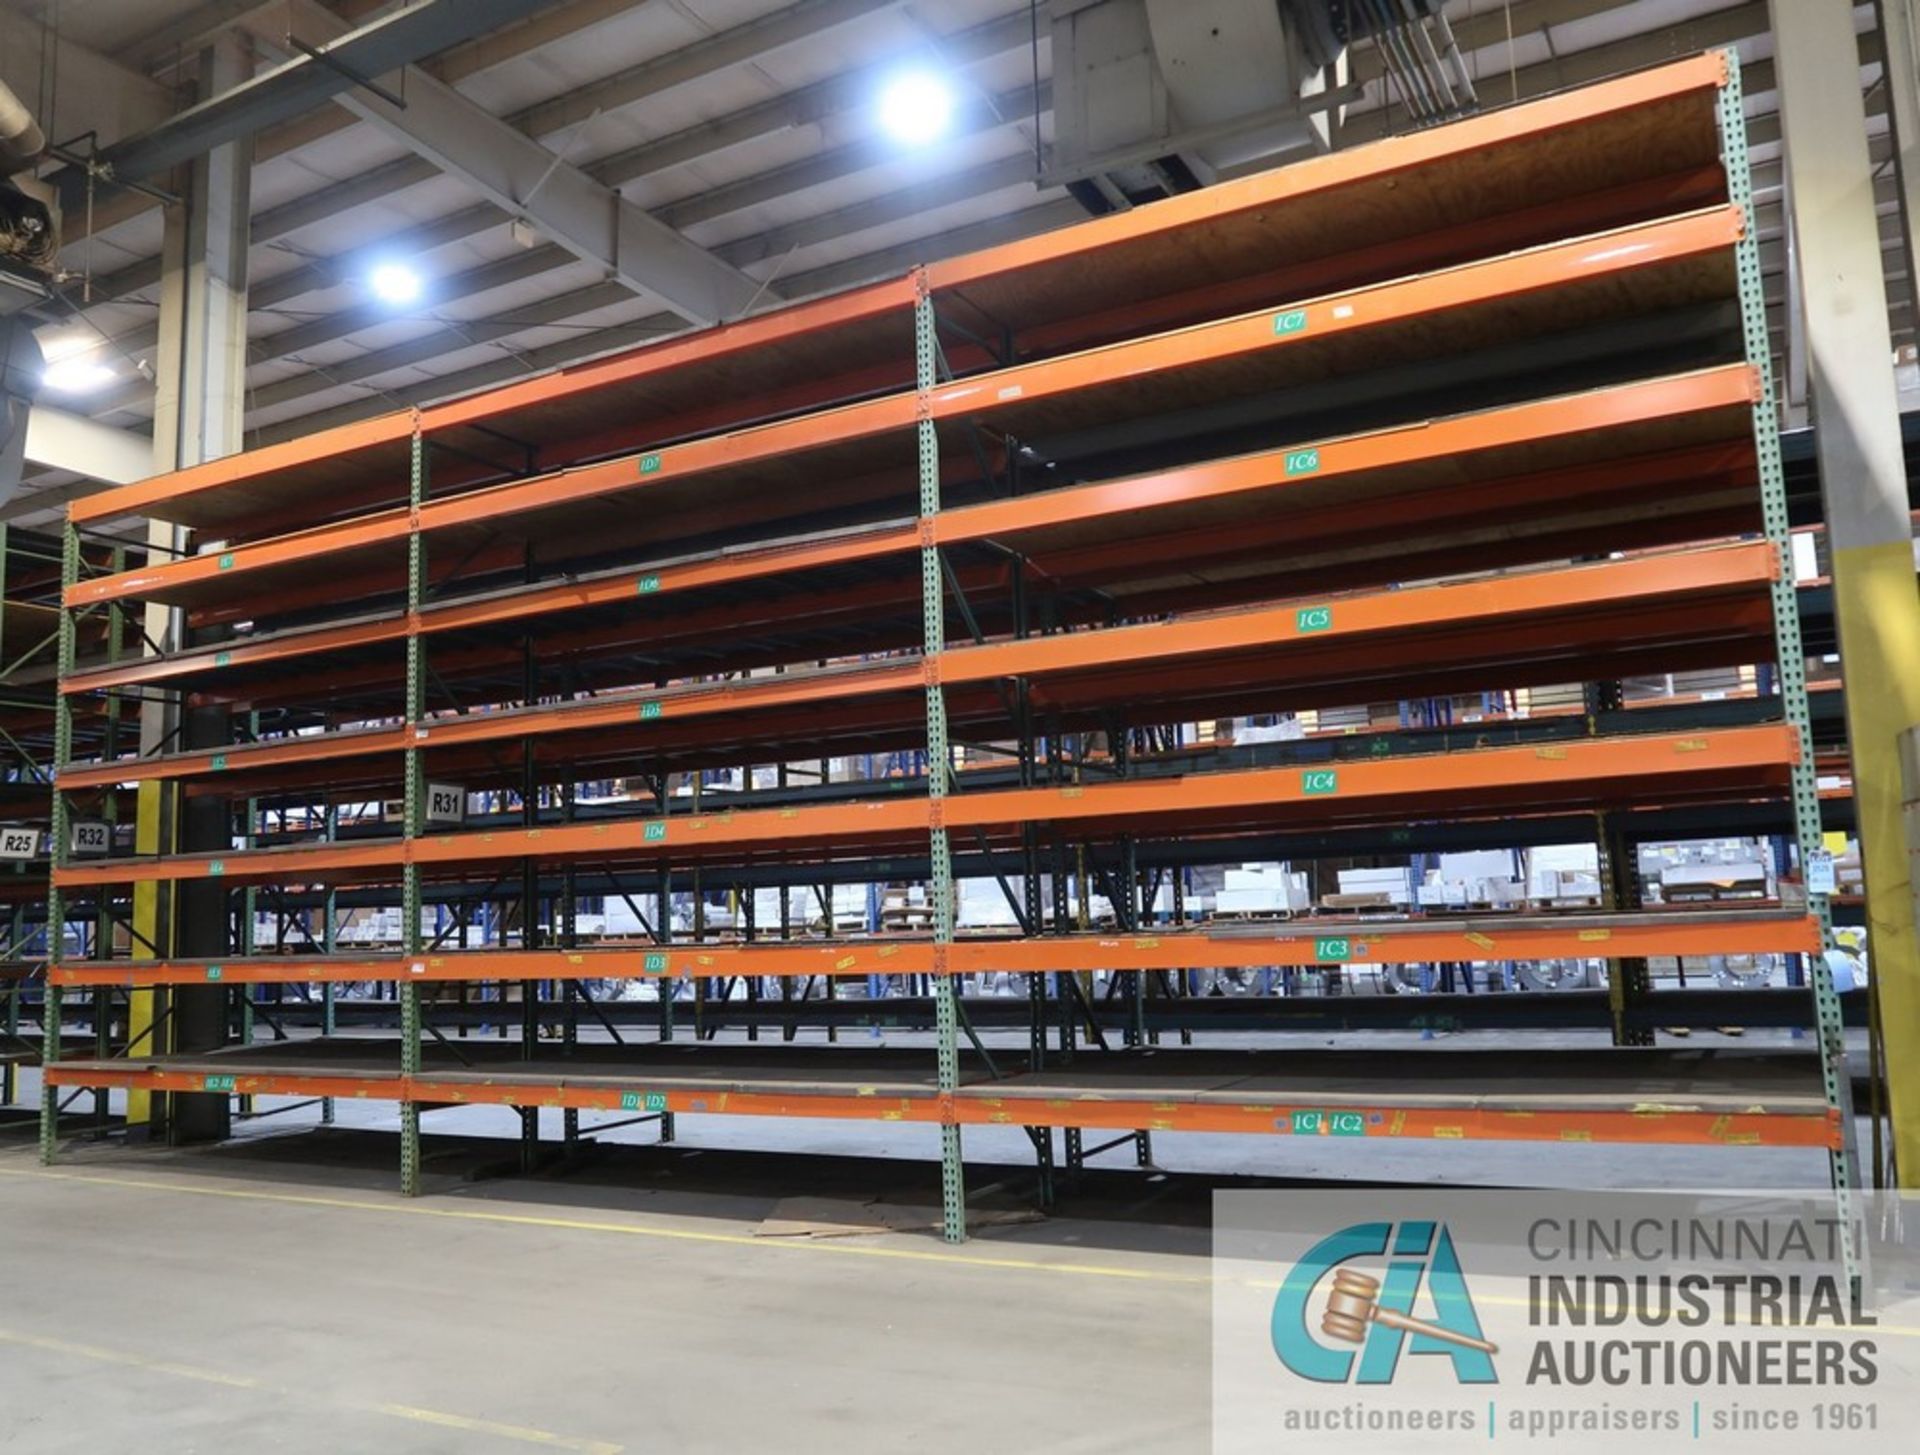 SECTIONS 42" X 144" Z 16' PALLET RACK, (8) UPRIGHTS, 984) 5" FACE CROSSBEAMS WITH 96" STEEL DECK